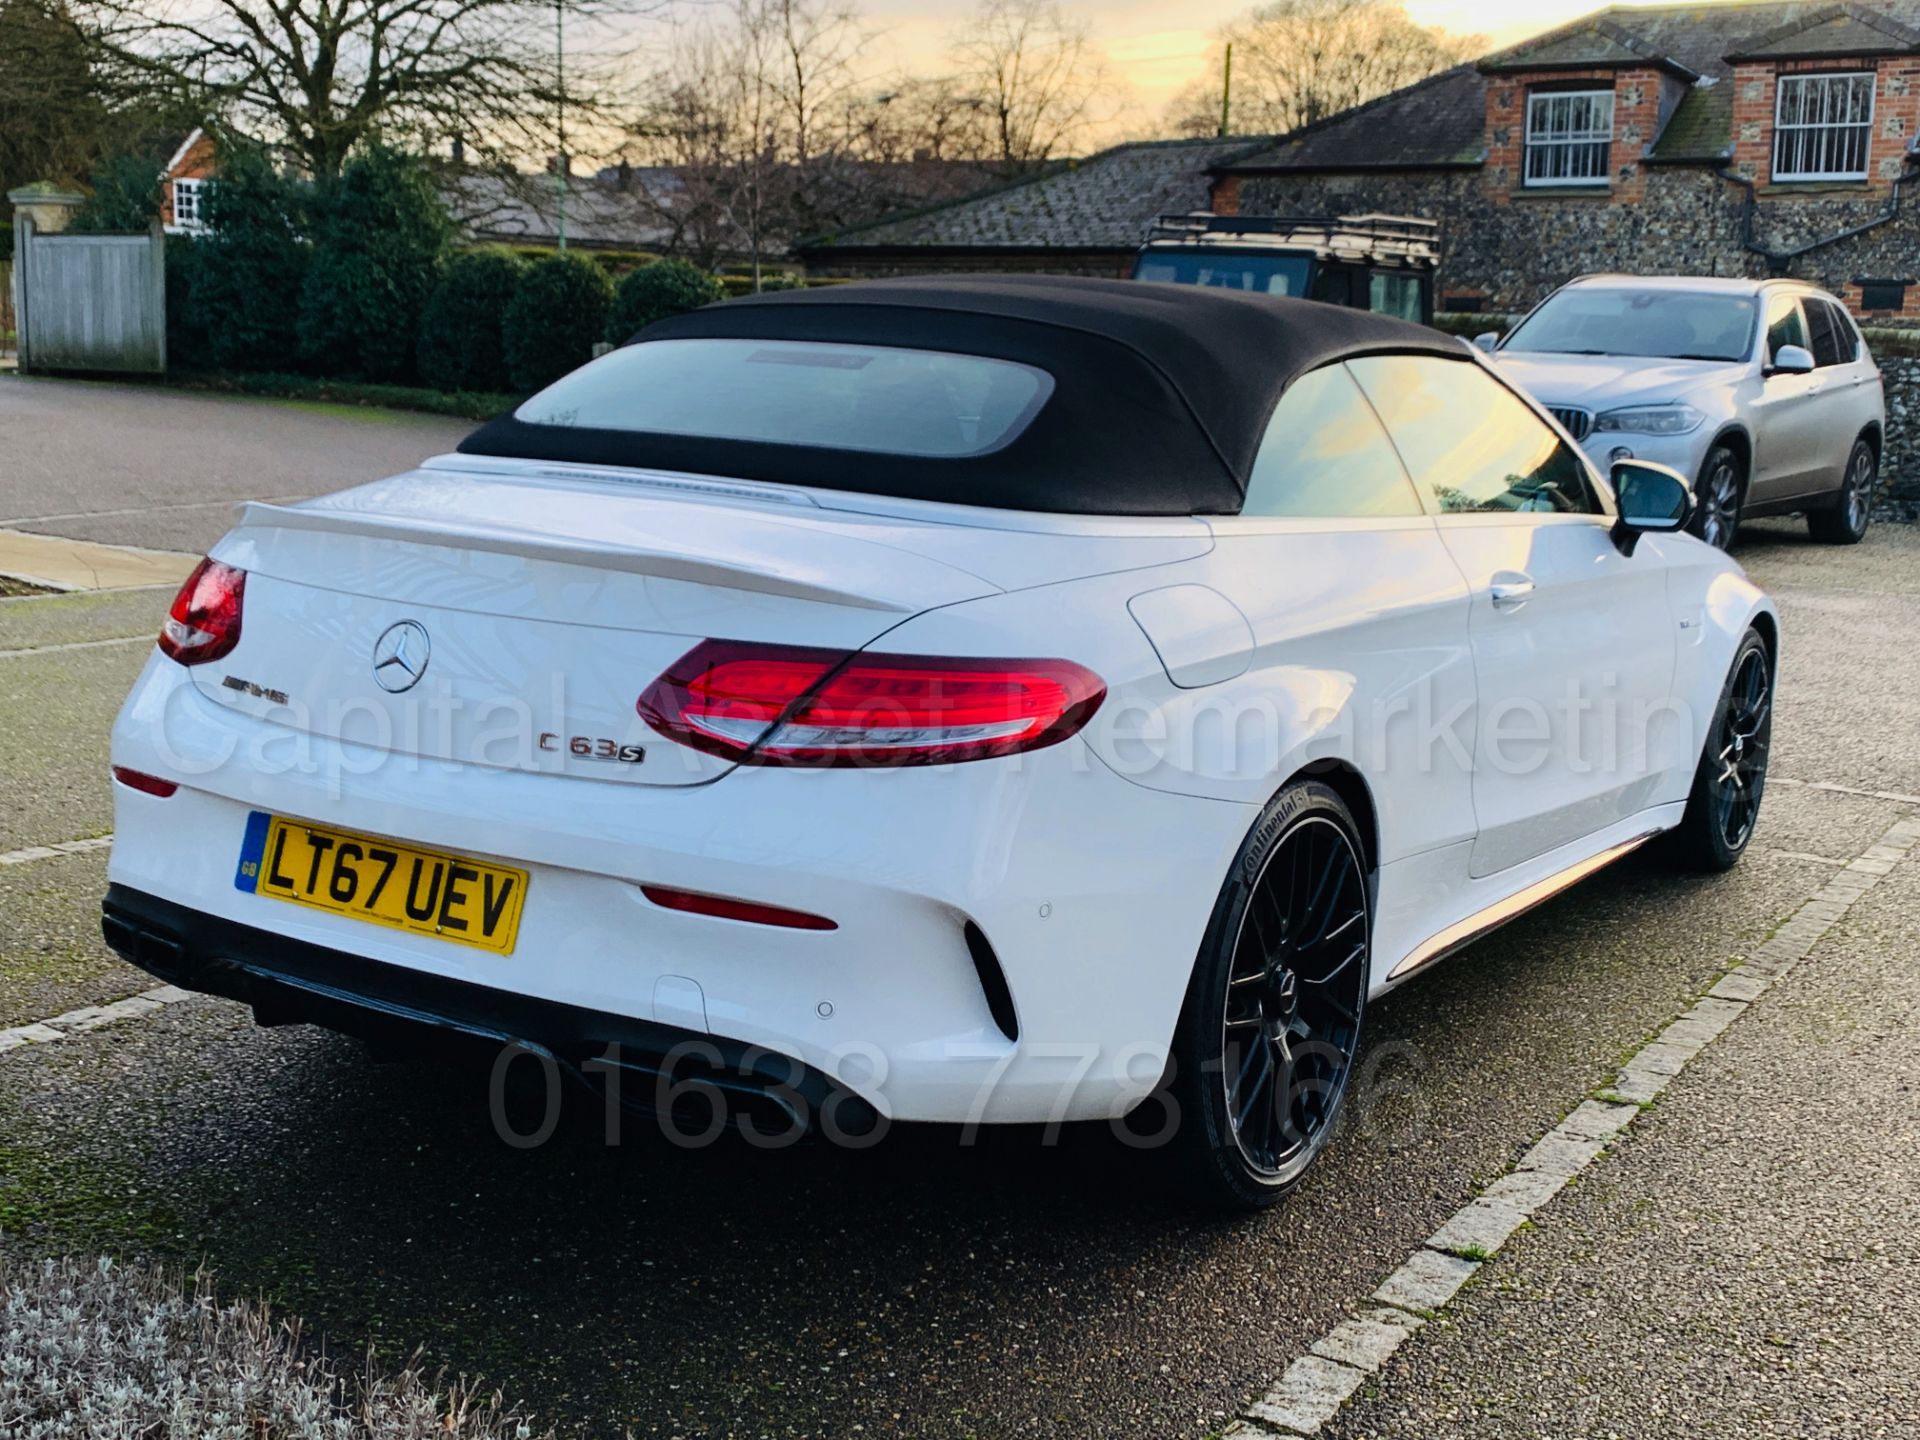 (On Sale) MERCEDES-BENZ AMG C63-S *CABRIOLET* (67 REG) '4.0 BI-TURBO -510 BHP - AUTO' *FULLY LOADED* - Image 22 of 79